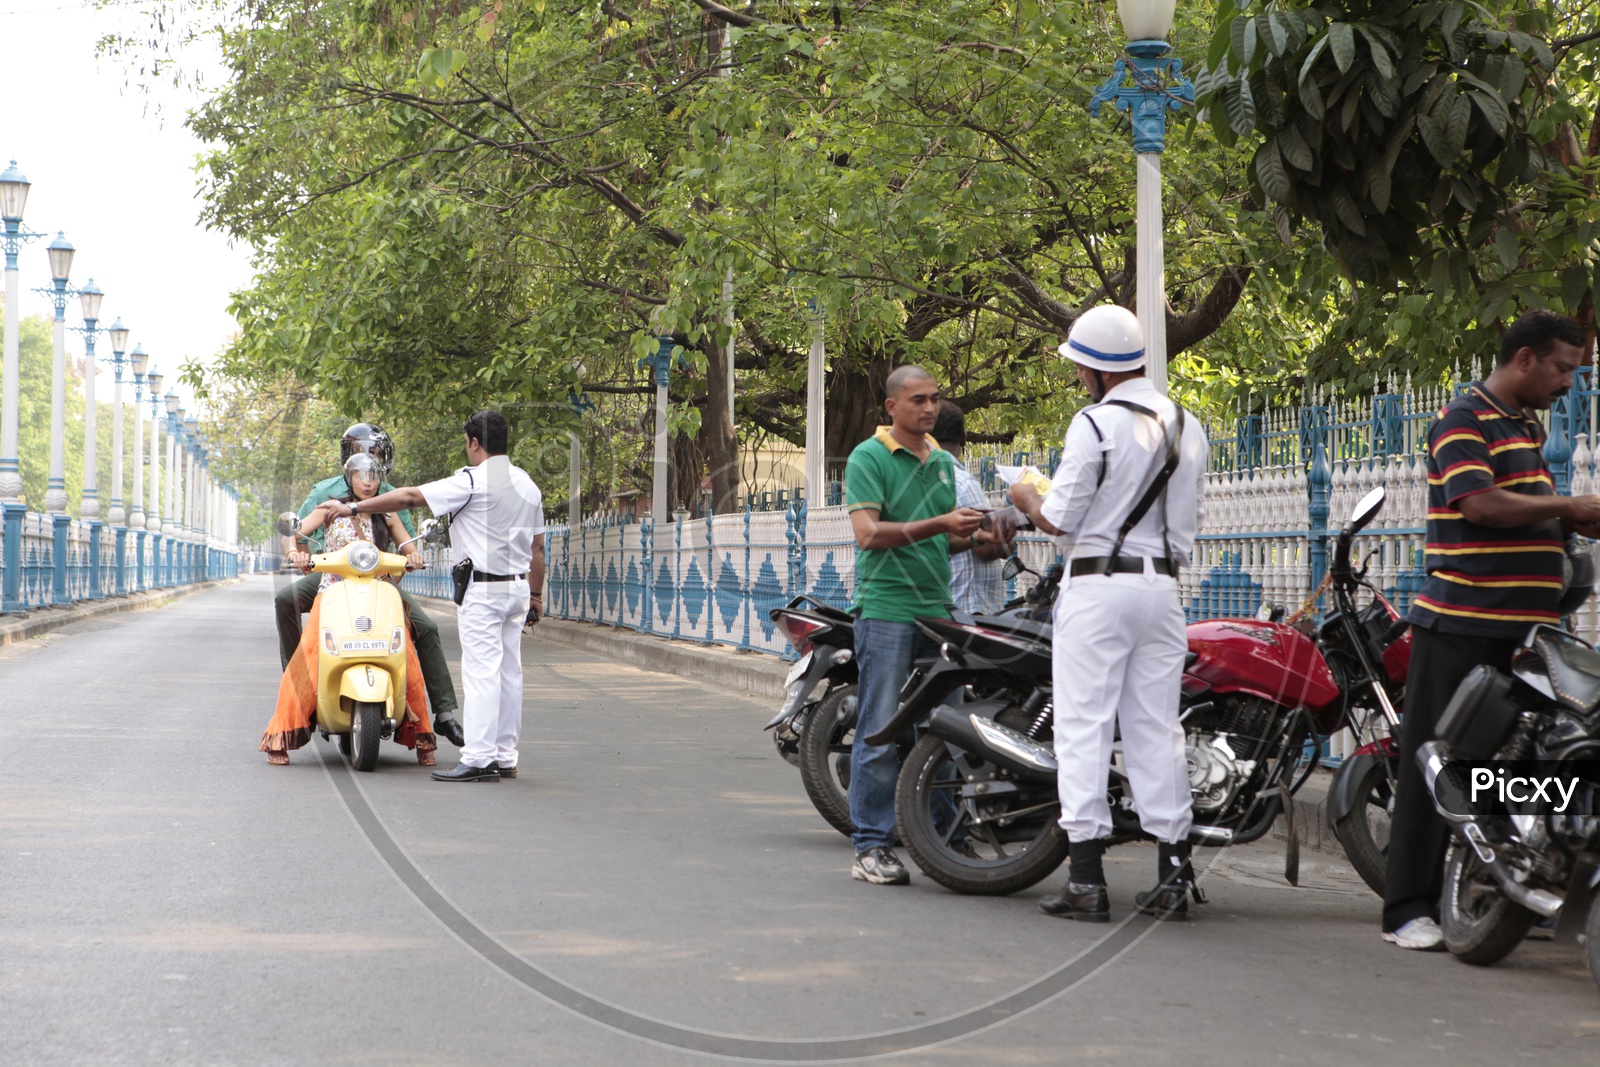 Traffic Police Checking Bike Documents and Licenses